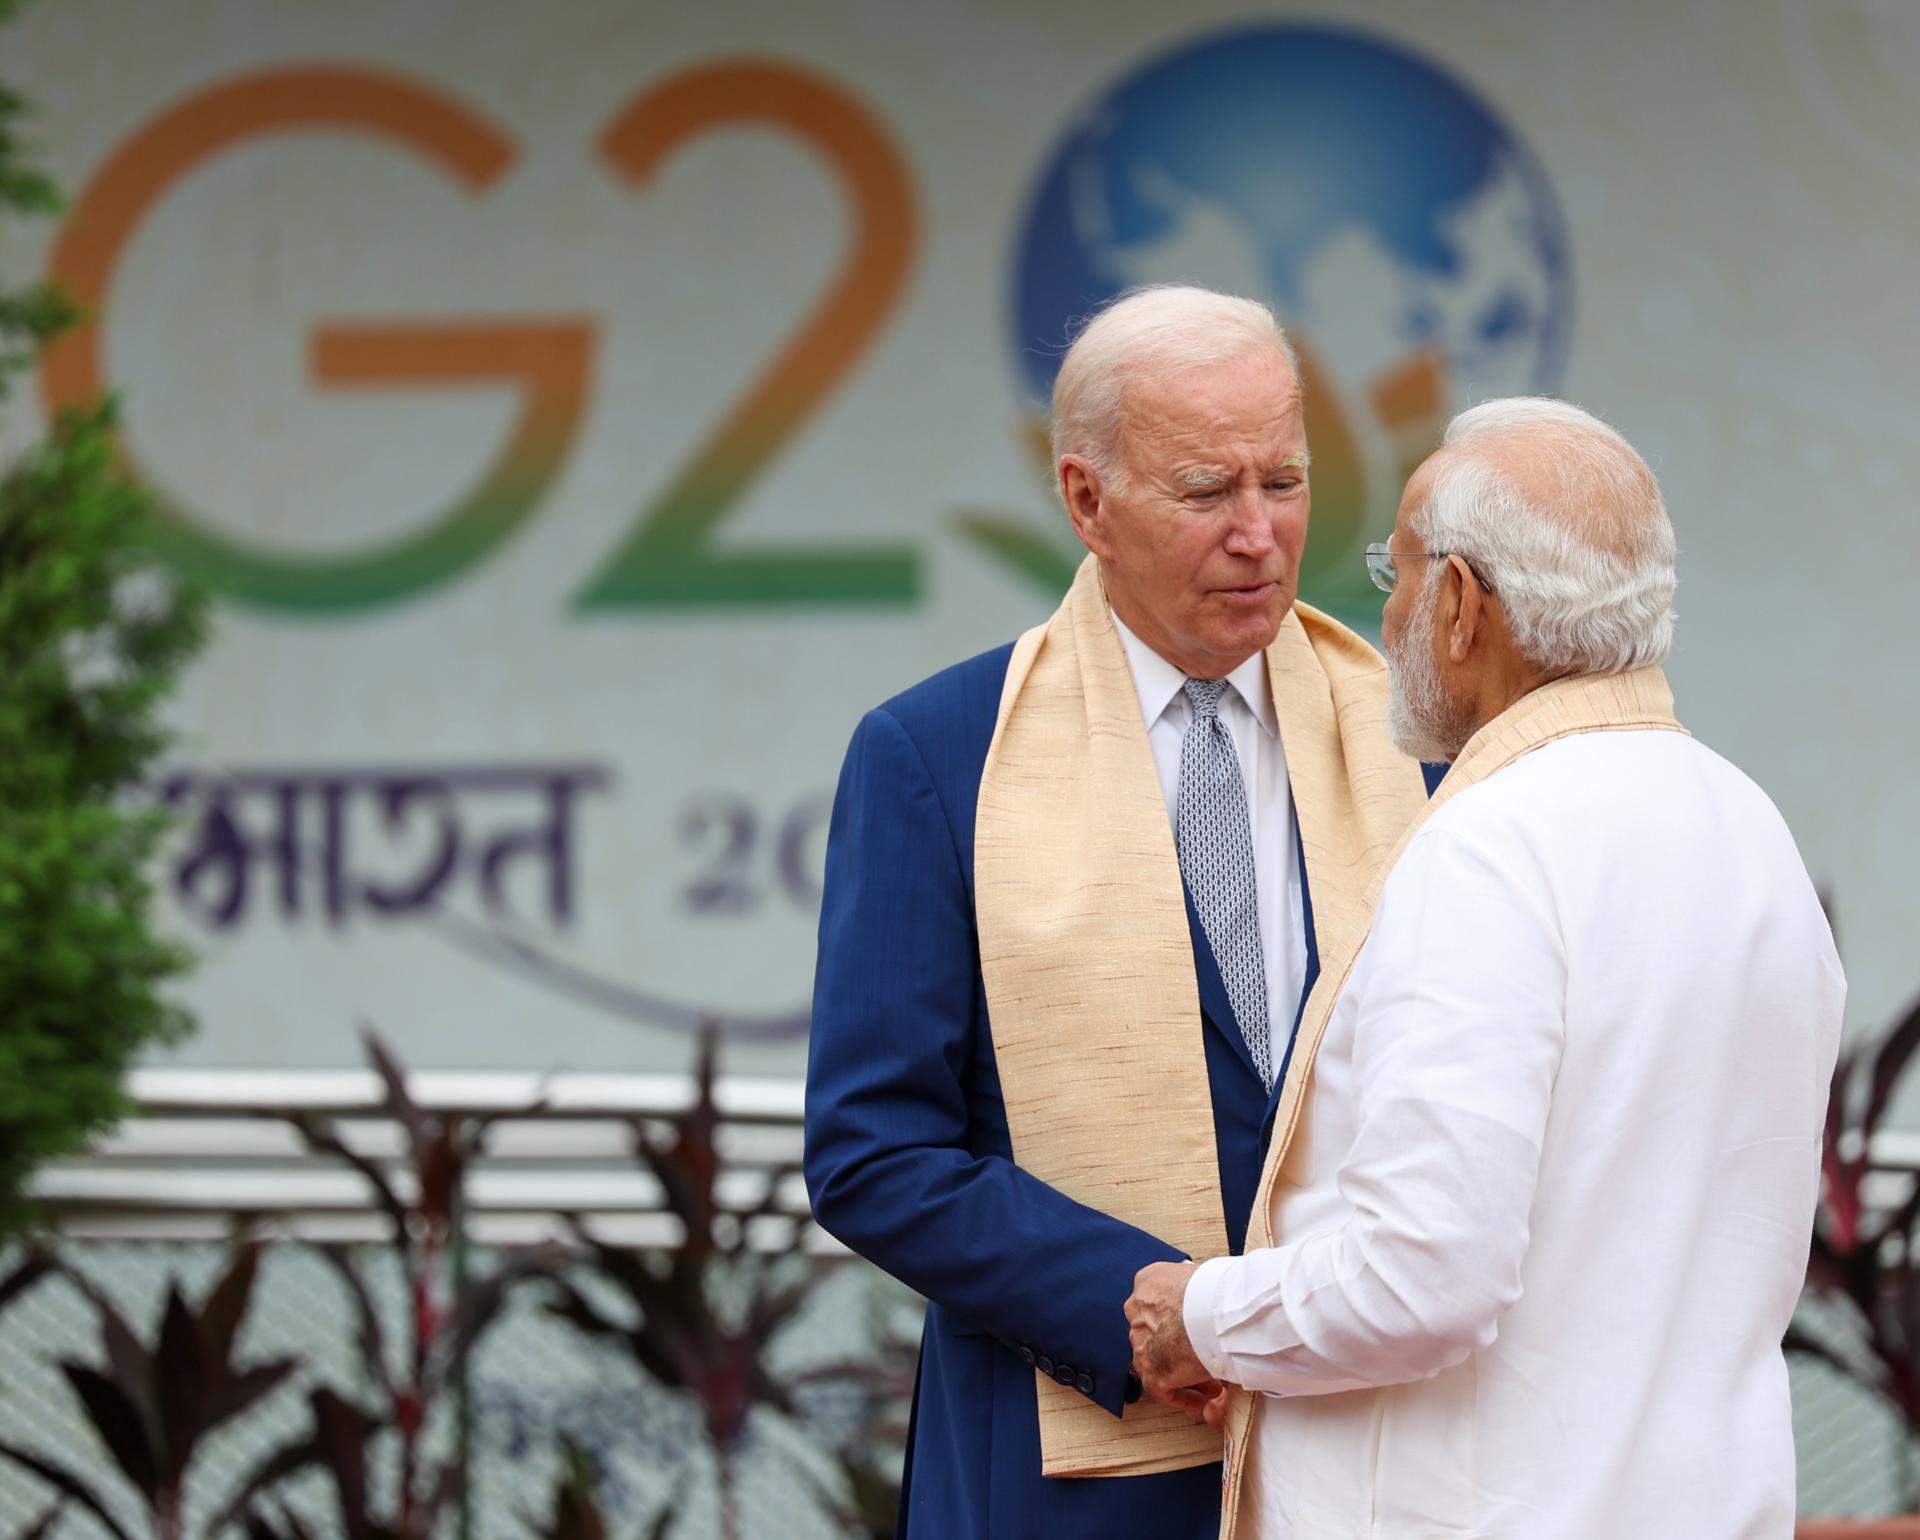 A handout photo made available by the Indian Press Information Bureau (PIB) shows shows Indian Prime Minister Narendra Modi (R) welcoming US President Jo Biden (C) upon his arrival at the Mahatma Gandhi's memorial in Rajghat, New Delhi, India 10 September 2023. EFE/EPA/INDIA PRESS INFORMATION BUREAU HANDOUT EDITORIAL USE ONLY/NO SALES